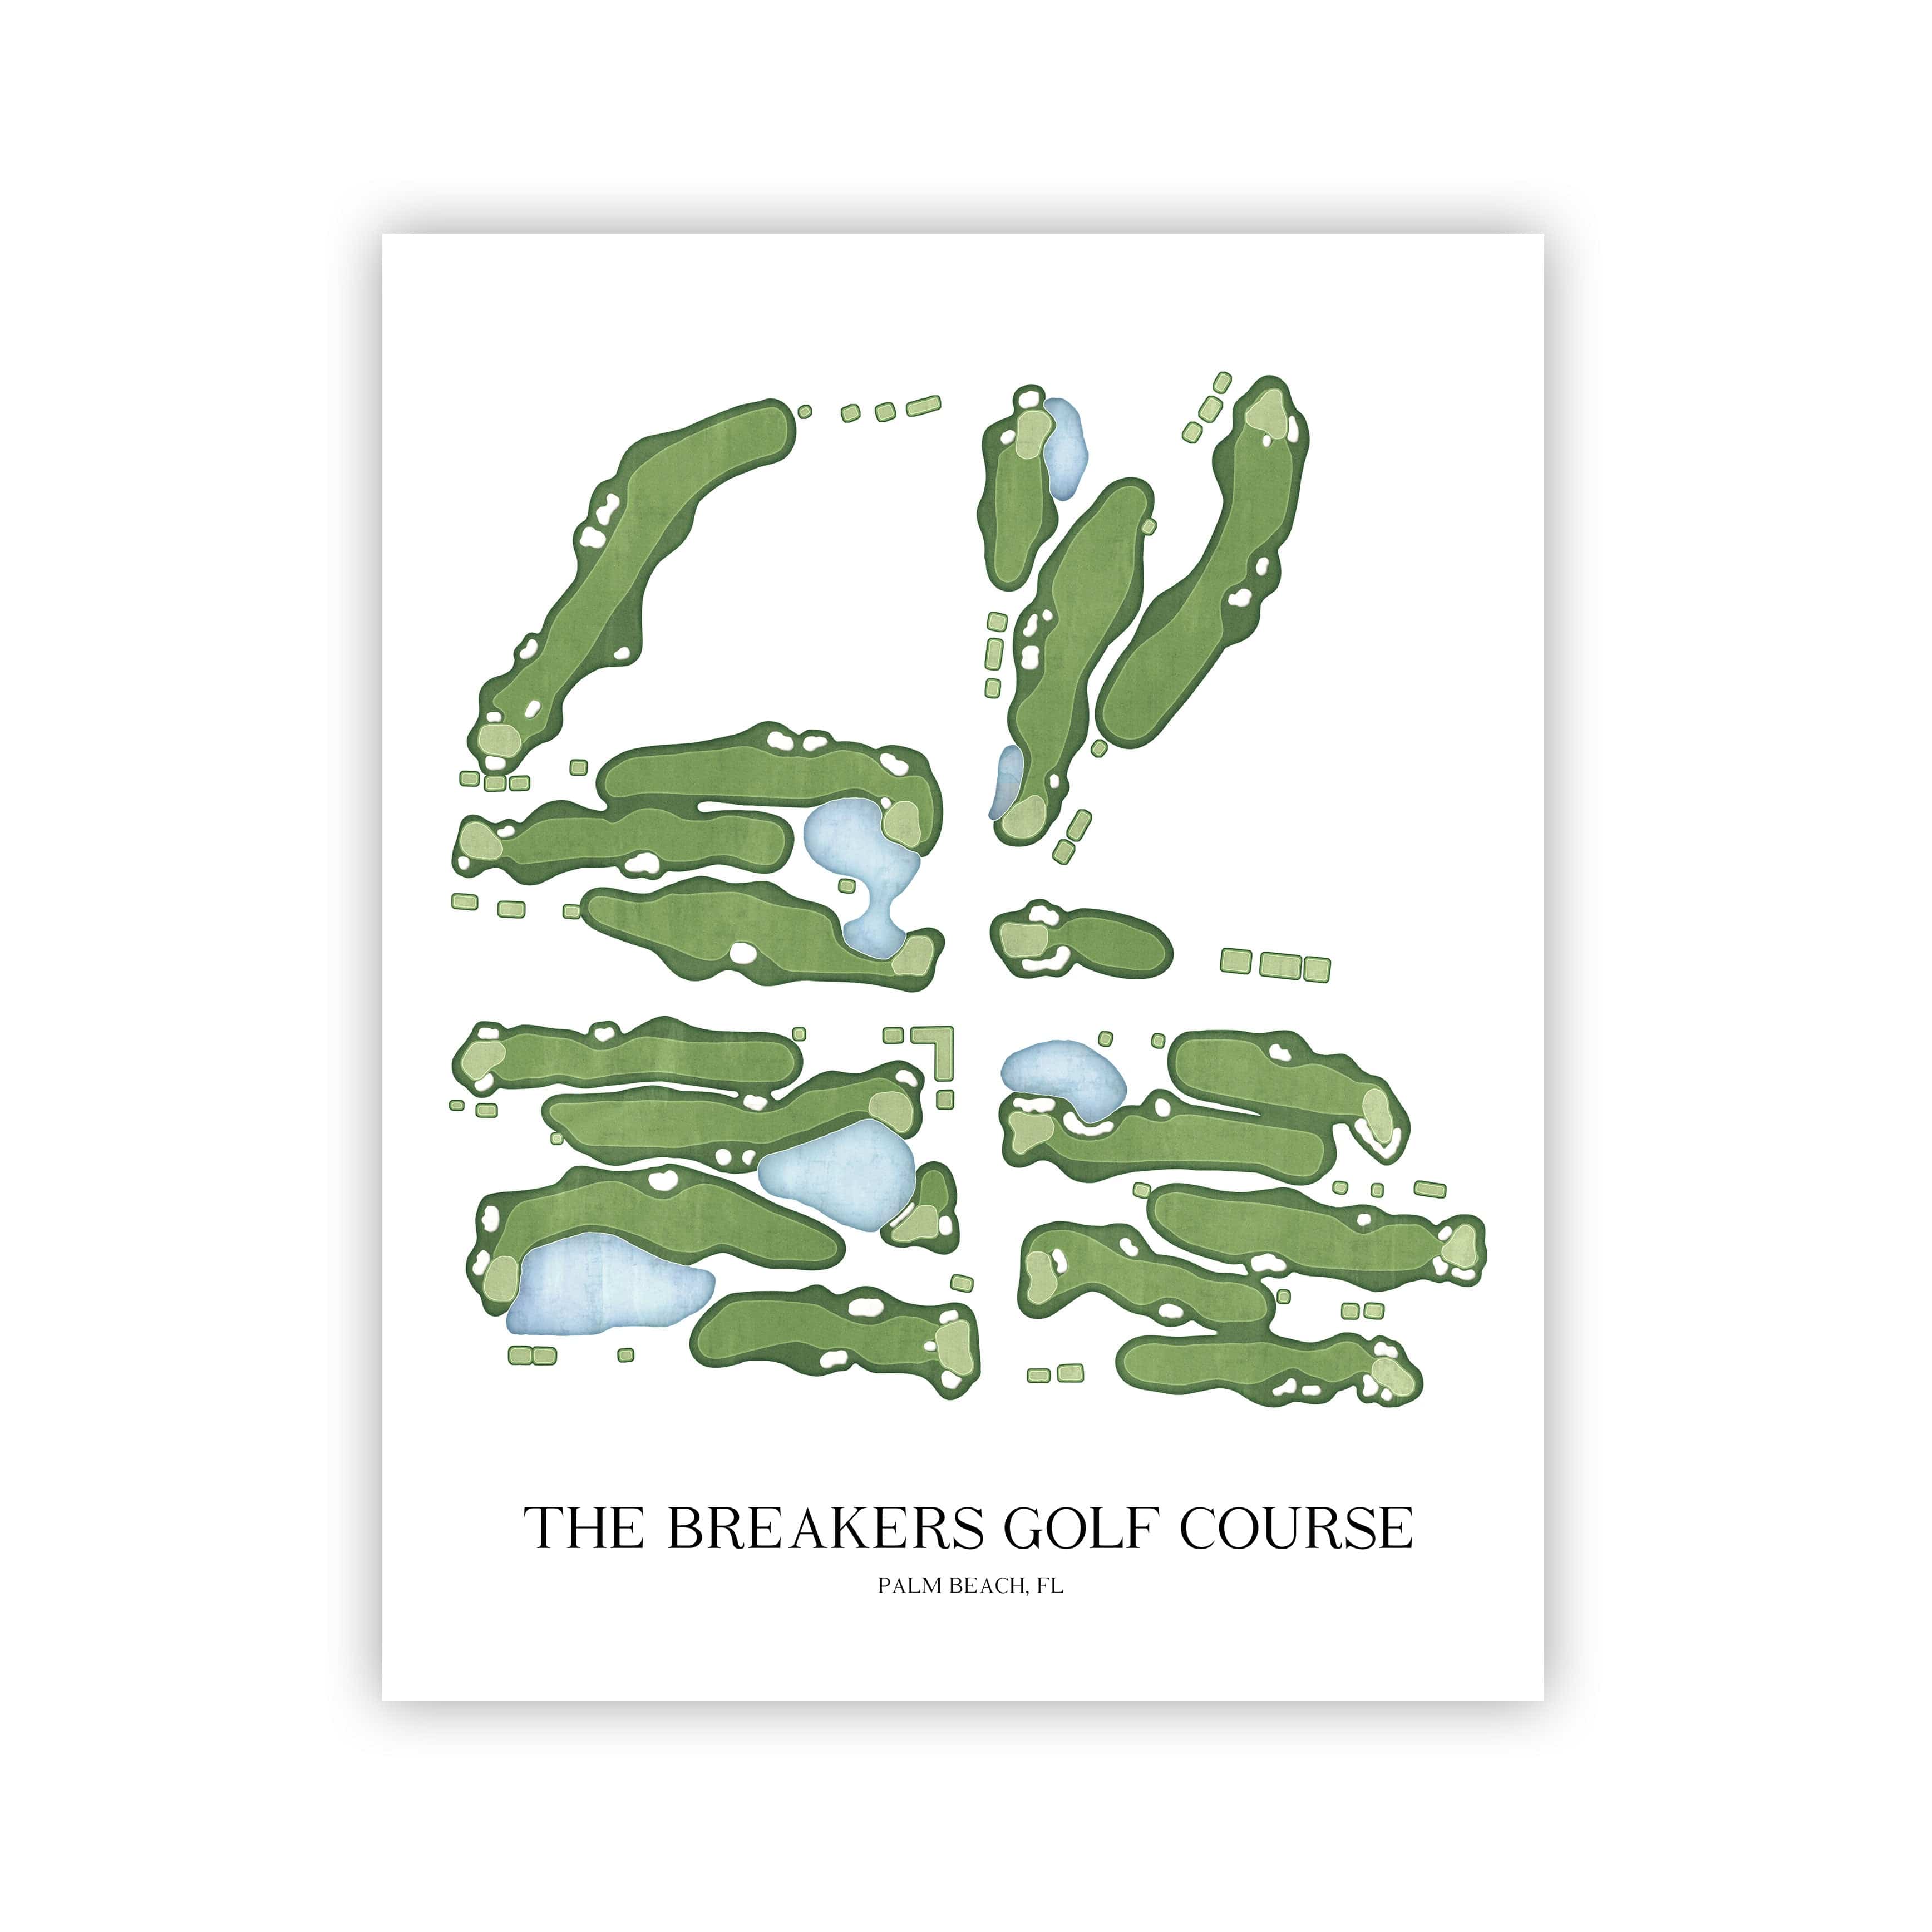 The 19th Hole Golf Shop - Golf Course Prints -  The Breakers Golf Course Golf Course Map